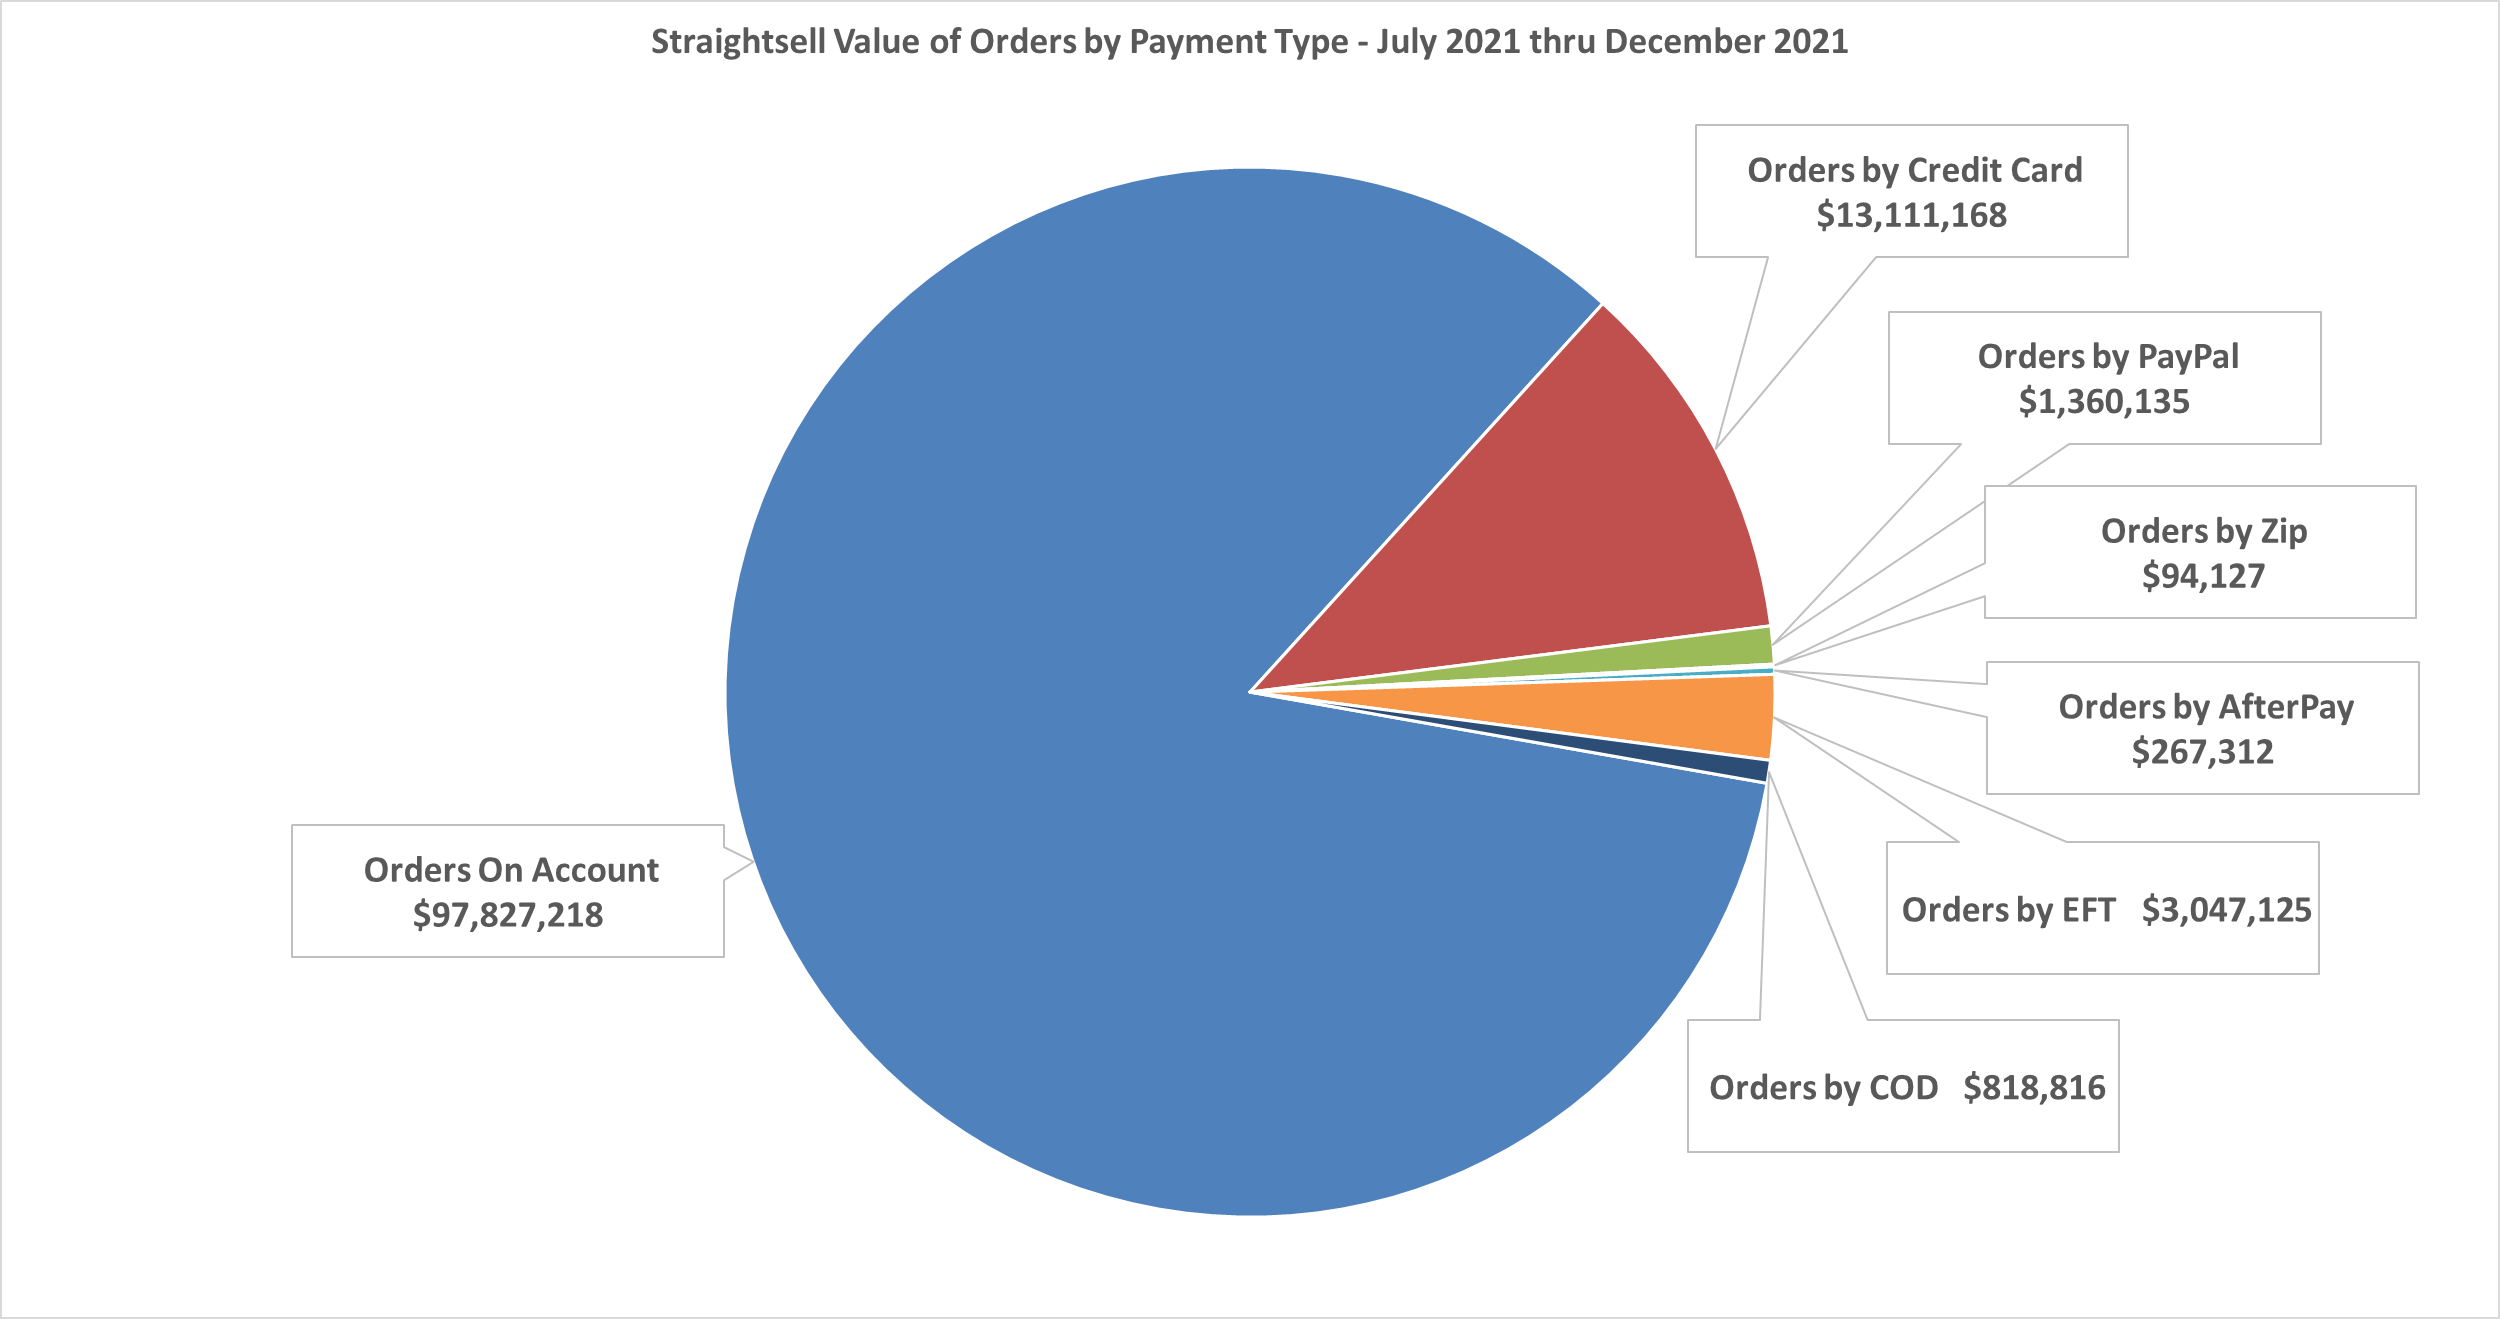 Straightsell Value of Orders by Payment Type - July 2021 thru December 2021